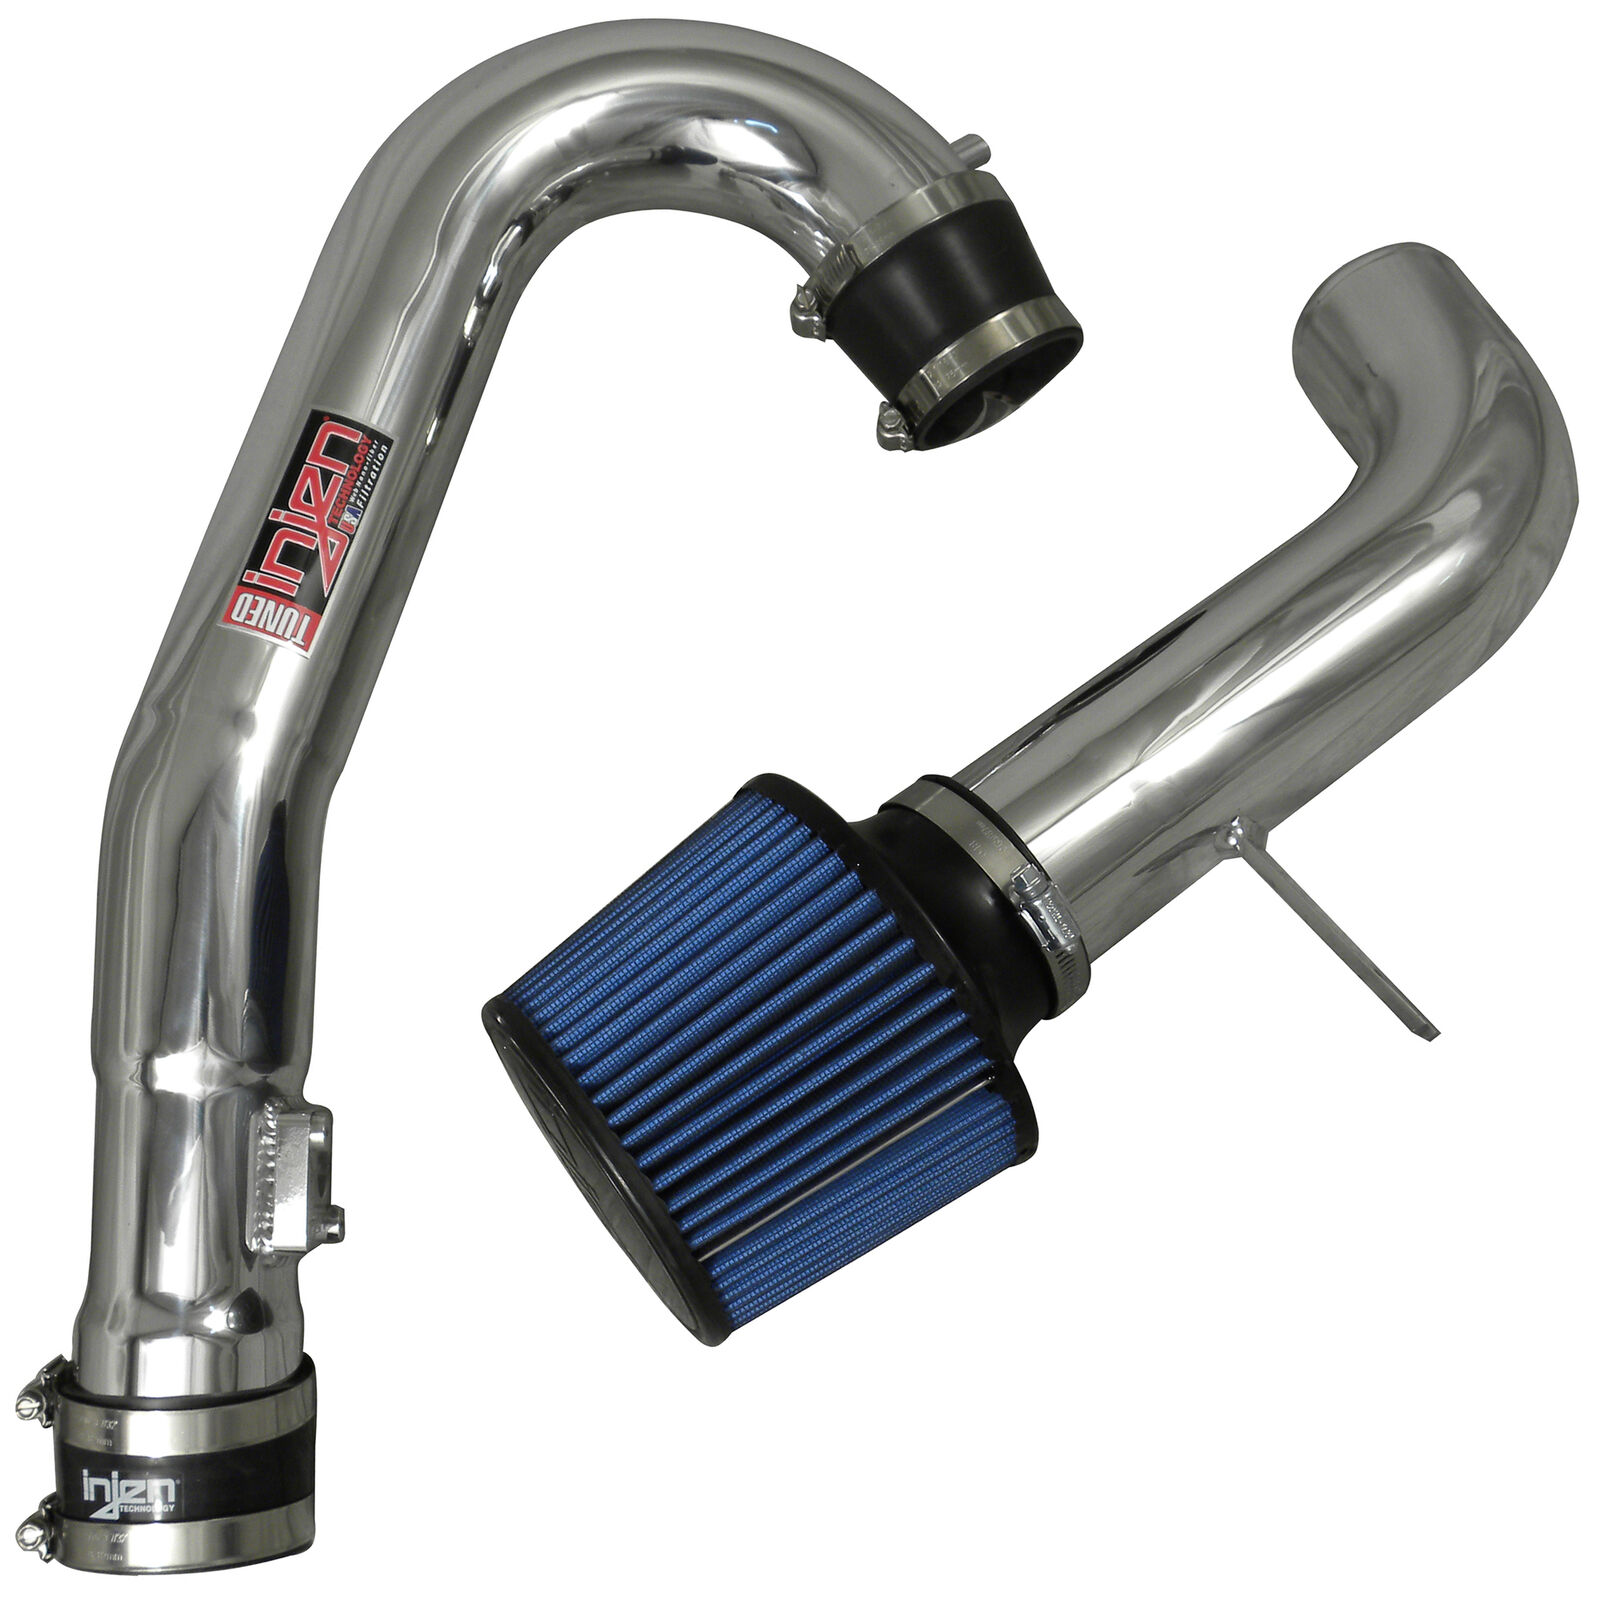 Injen SP1240P Polished Aluminum Cold Air Intake for 2010-17 Subaru Outback 2.5L